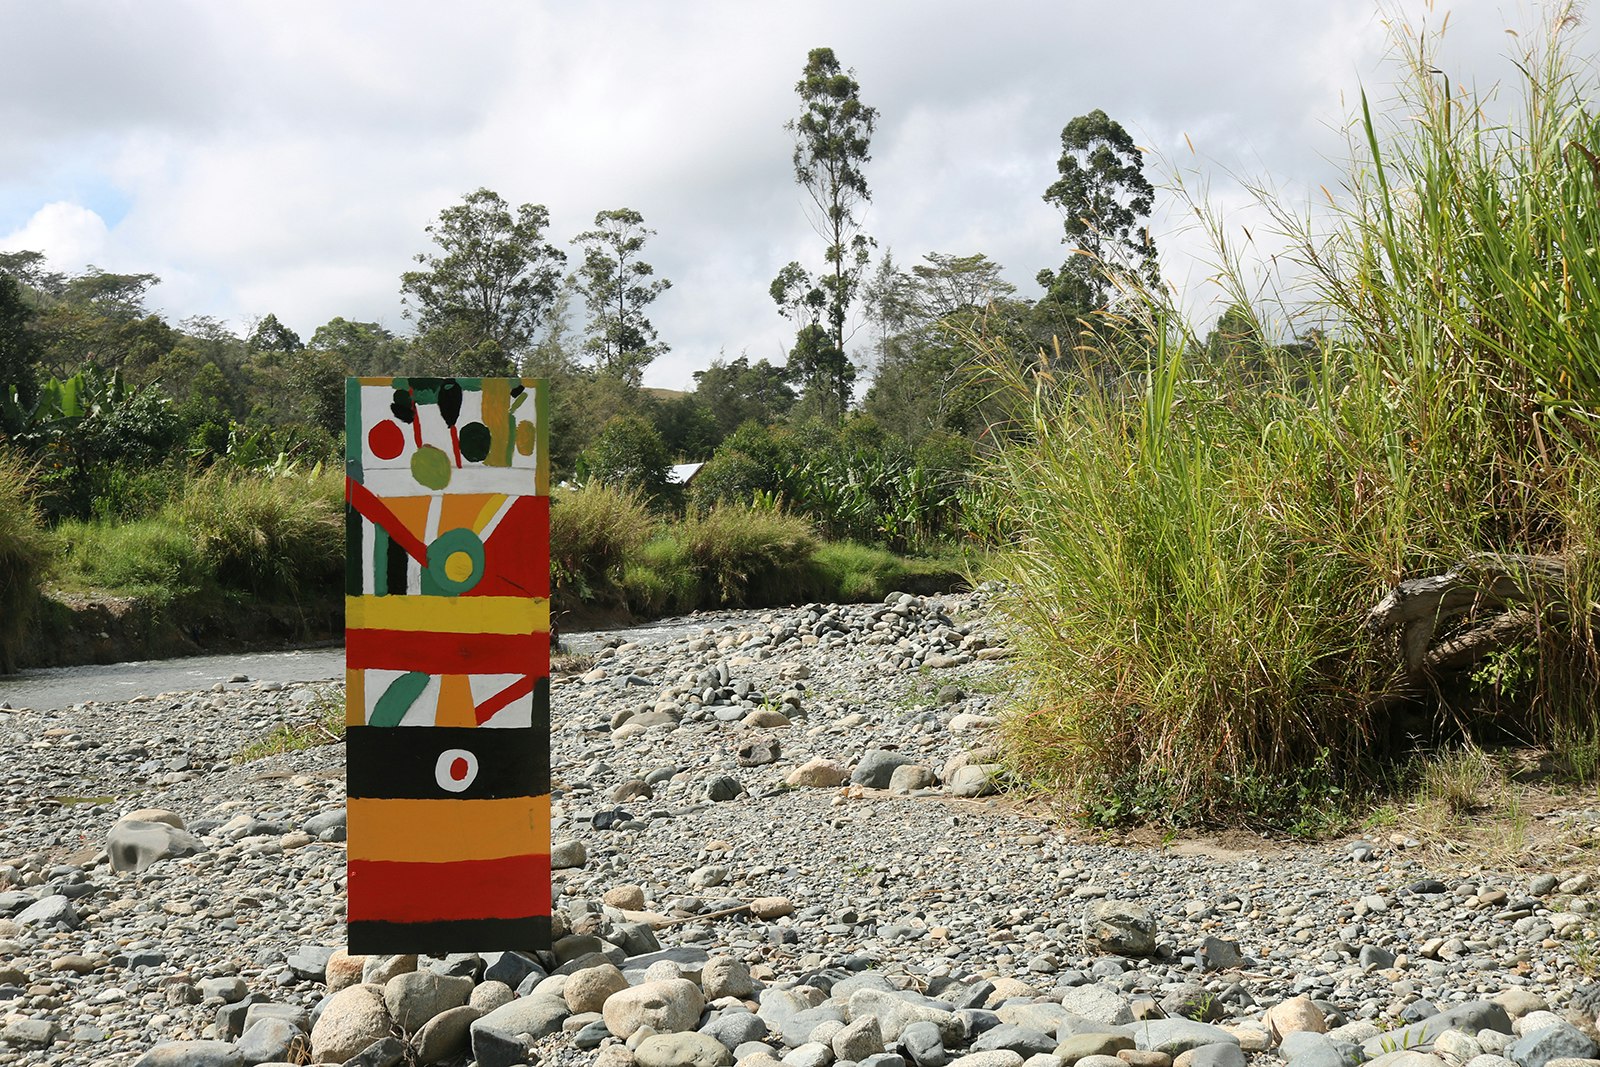 A kuman (shield) painted with a pattern of red, orange, green, yellow, white and black, standing on rocky ground near some tall grass.